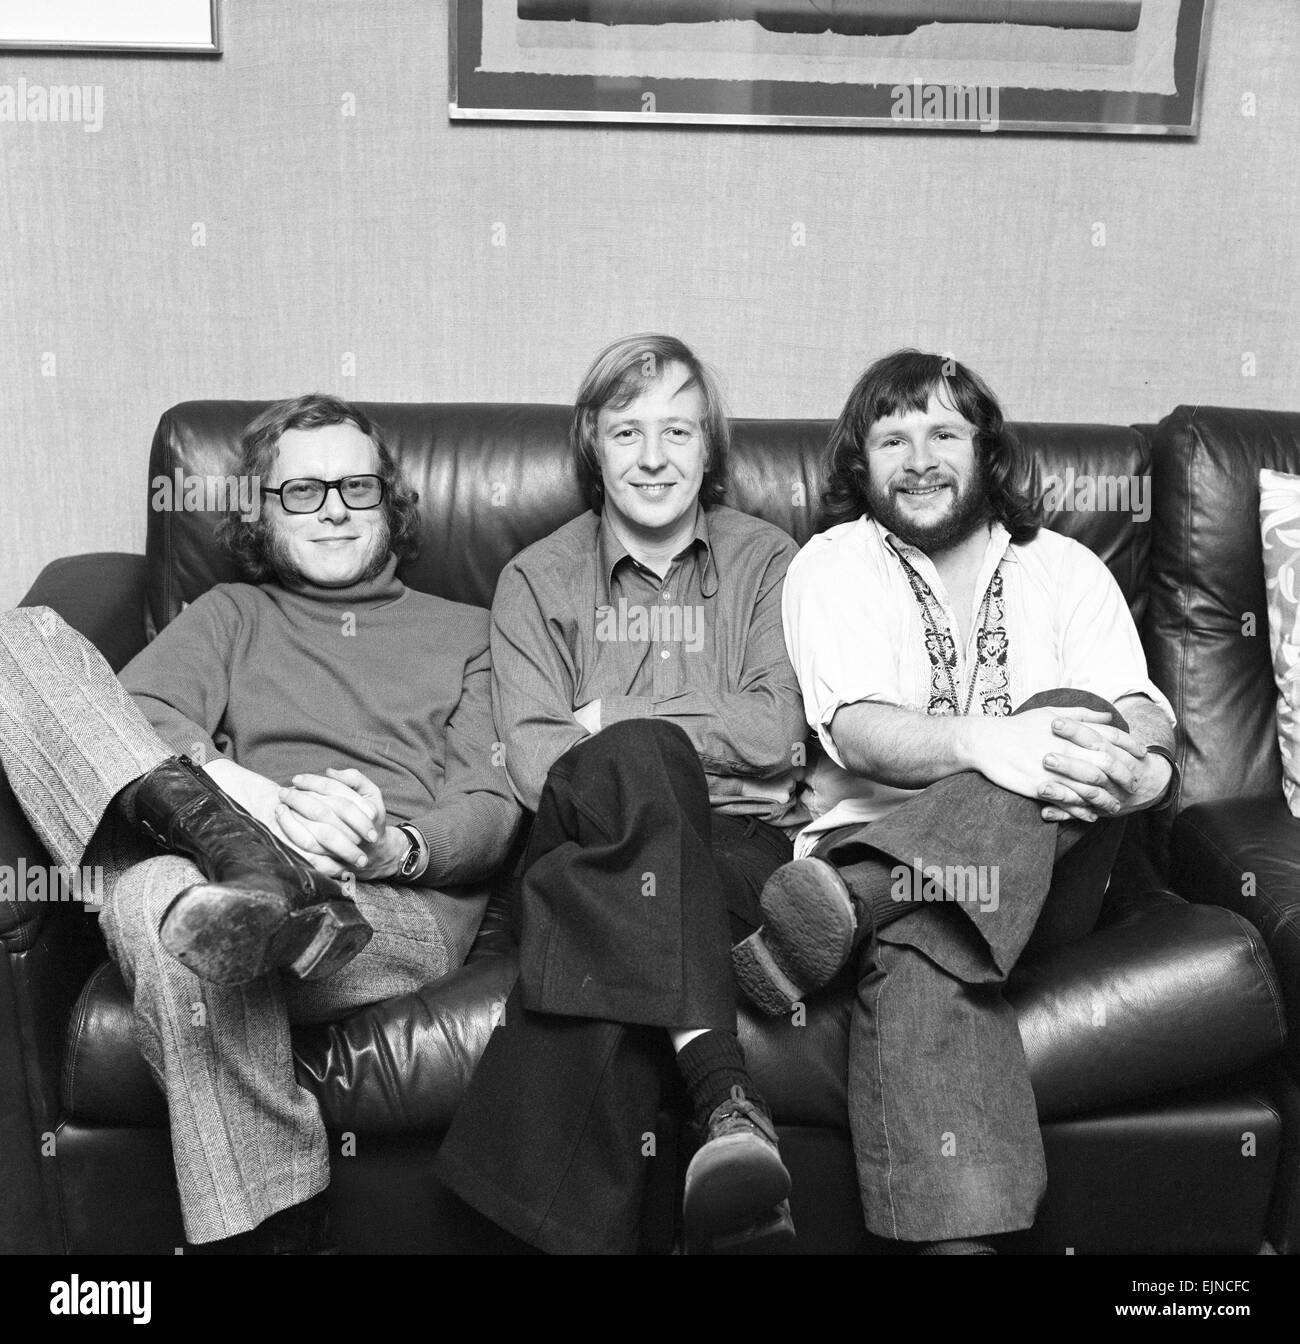 The Goodies, will be returning for a new series on BBC2 at 8.15 pm from Sunday. Photocall for interview at Graeme Garden's North London home, Thursday 25th January 1973. The Goodies Trio are Tim Brooke-Taylor, Graeme Garden & Bill Oddie. Stock Photo